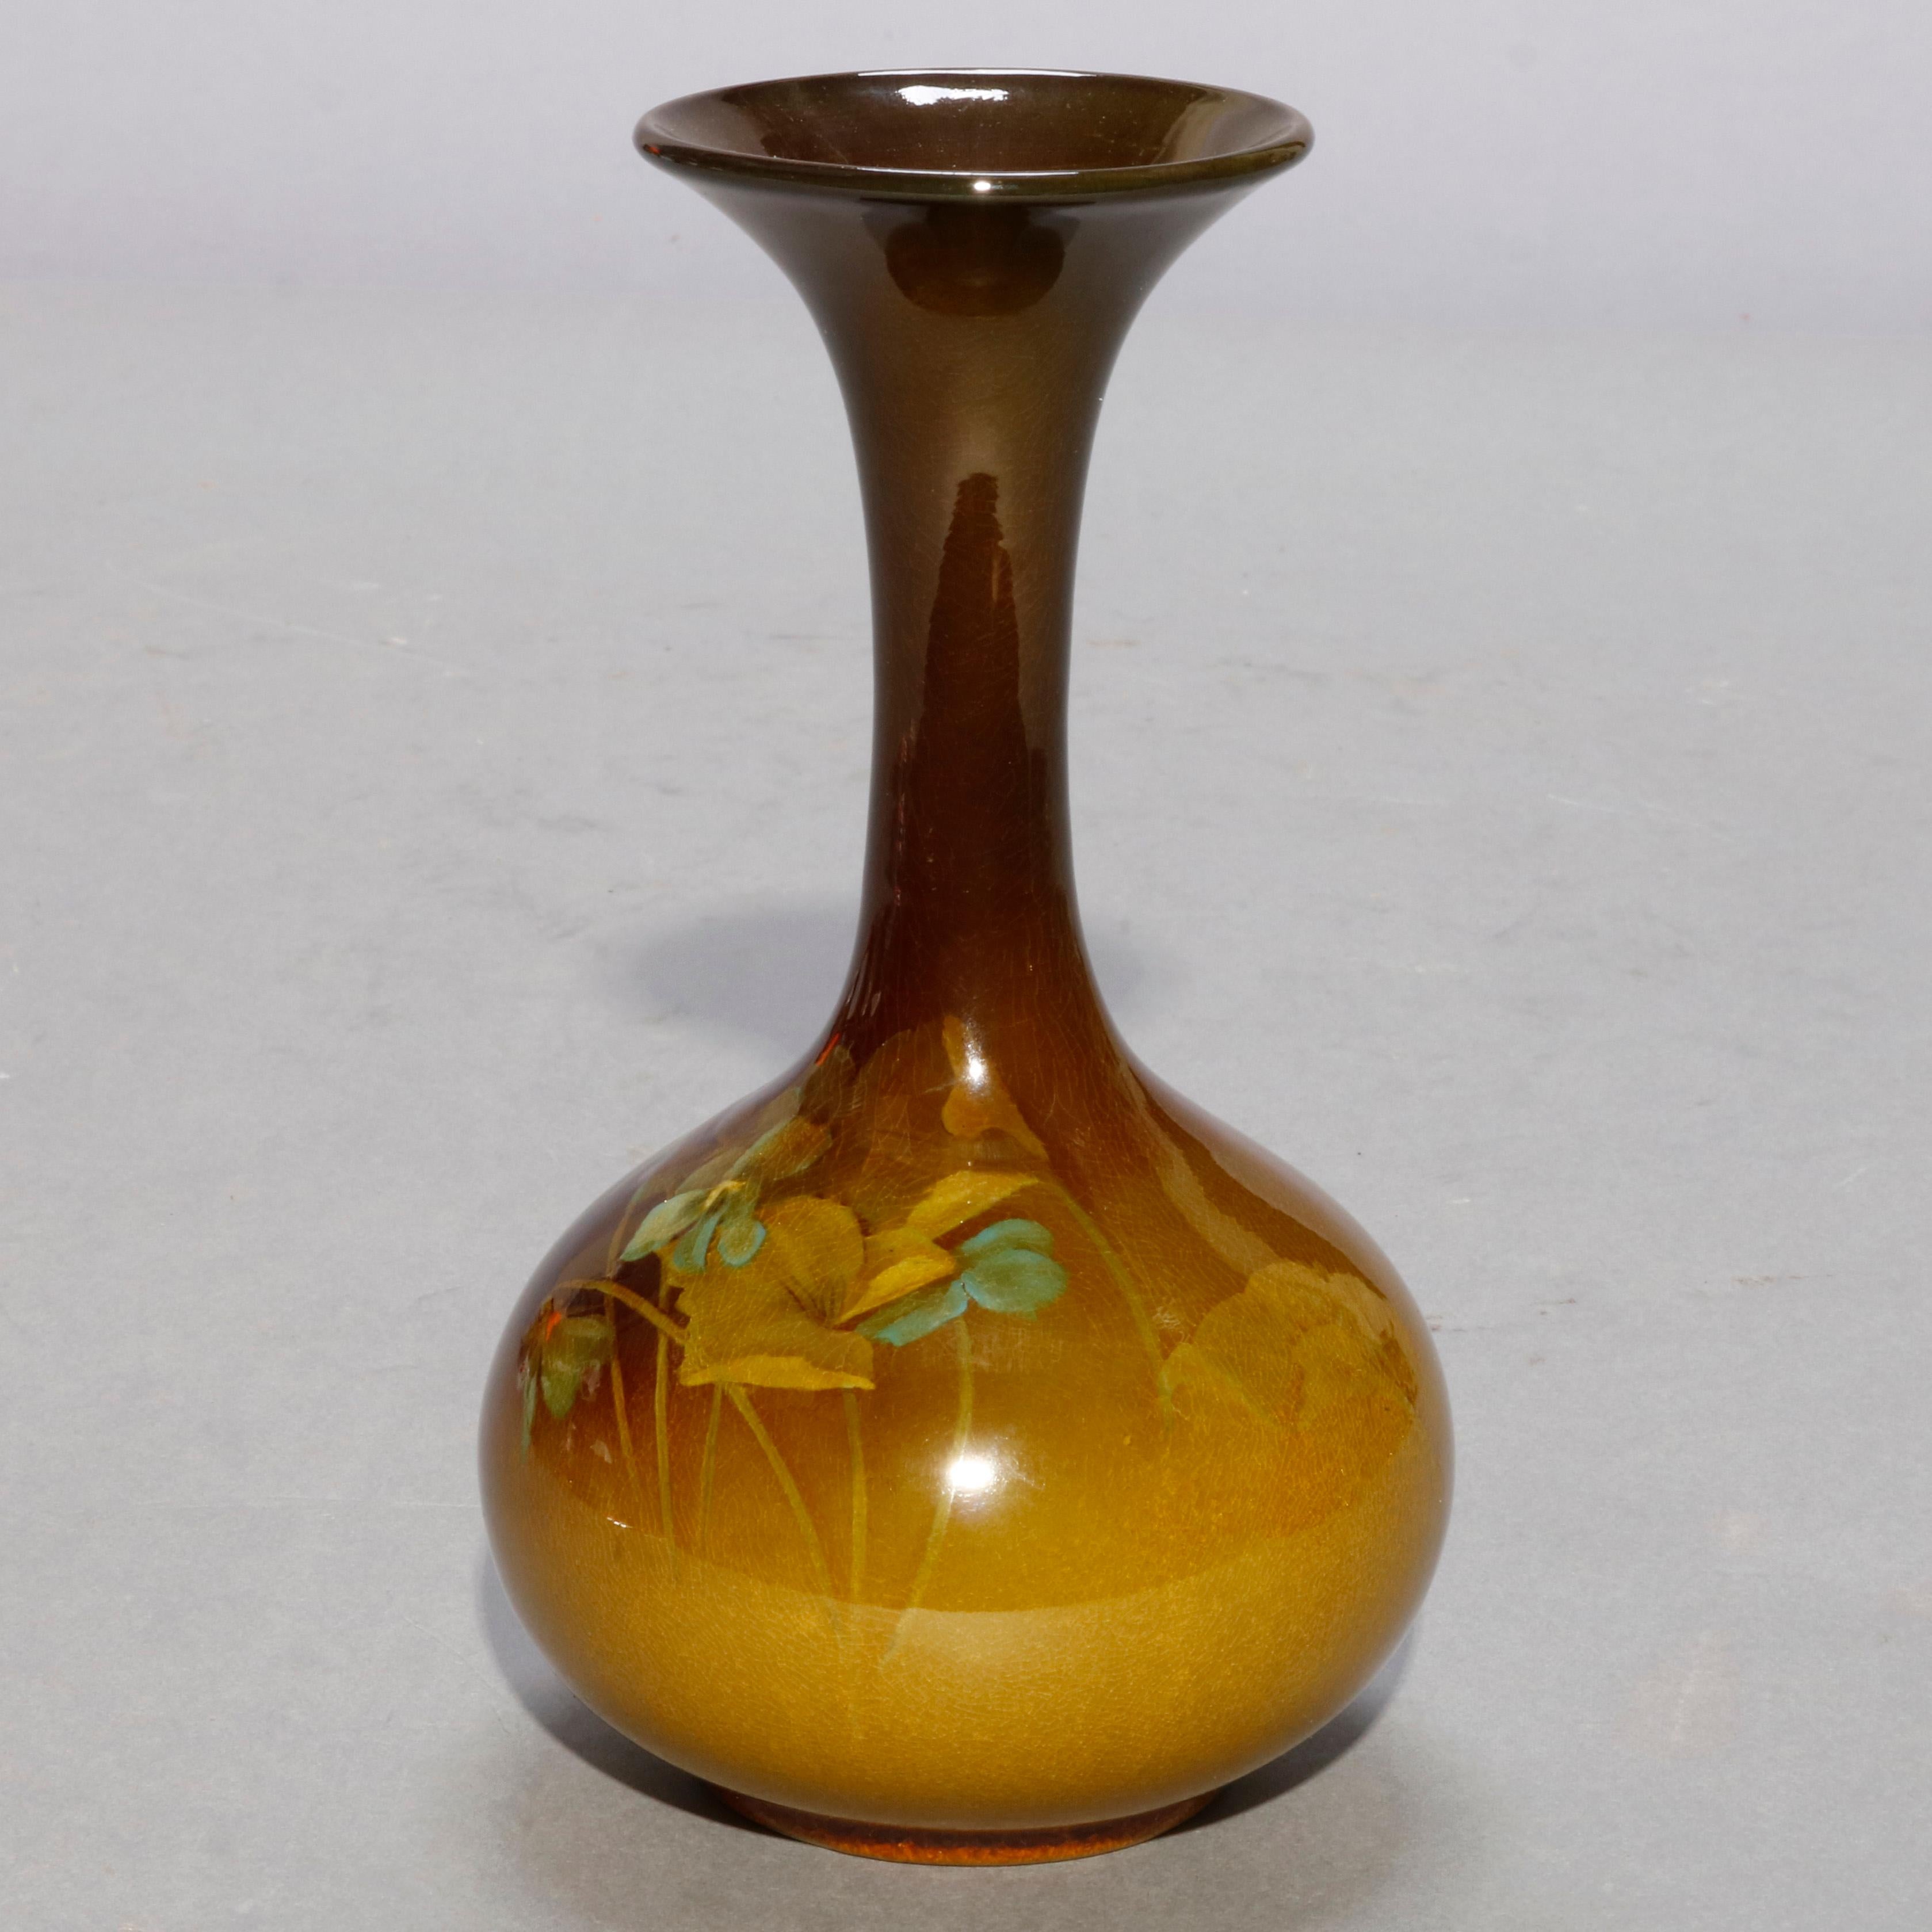 An antique artist-signed art pottery vase by A. D. Sehoun of Rookwood offers bulbous form with extended neck and wide mouth having standard glaze with hand painted floral decoration, maker stamp and artist signature on base Signed A.D. Sehoun, circa